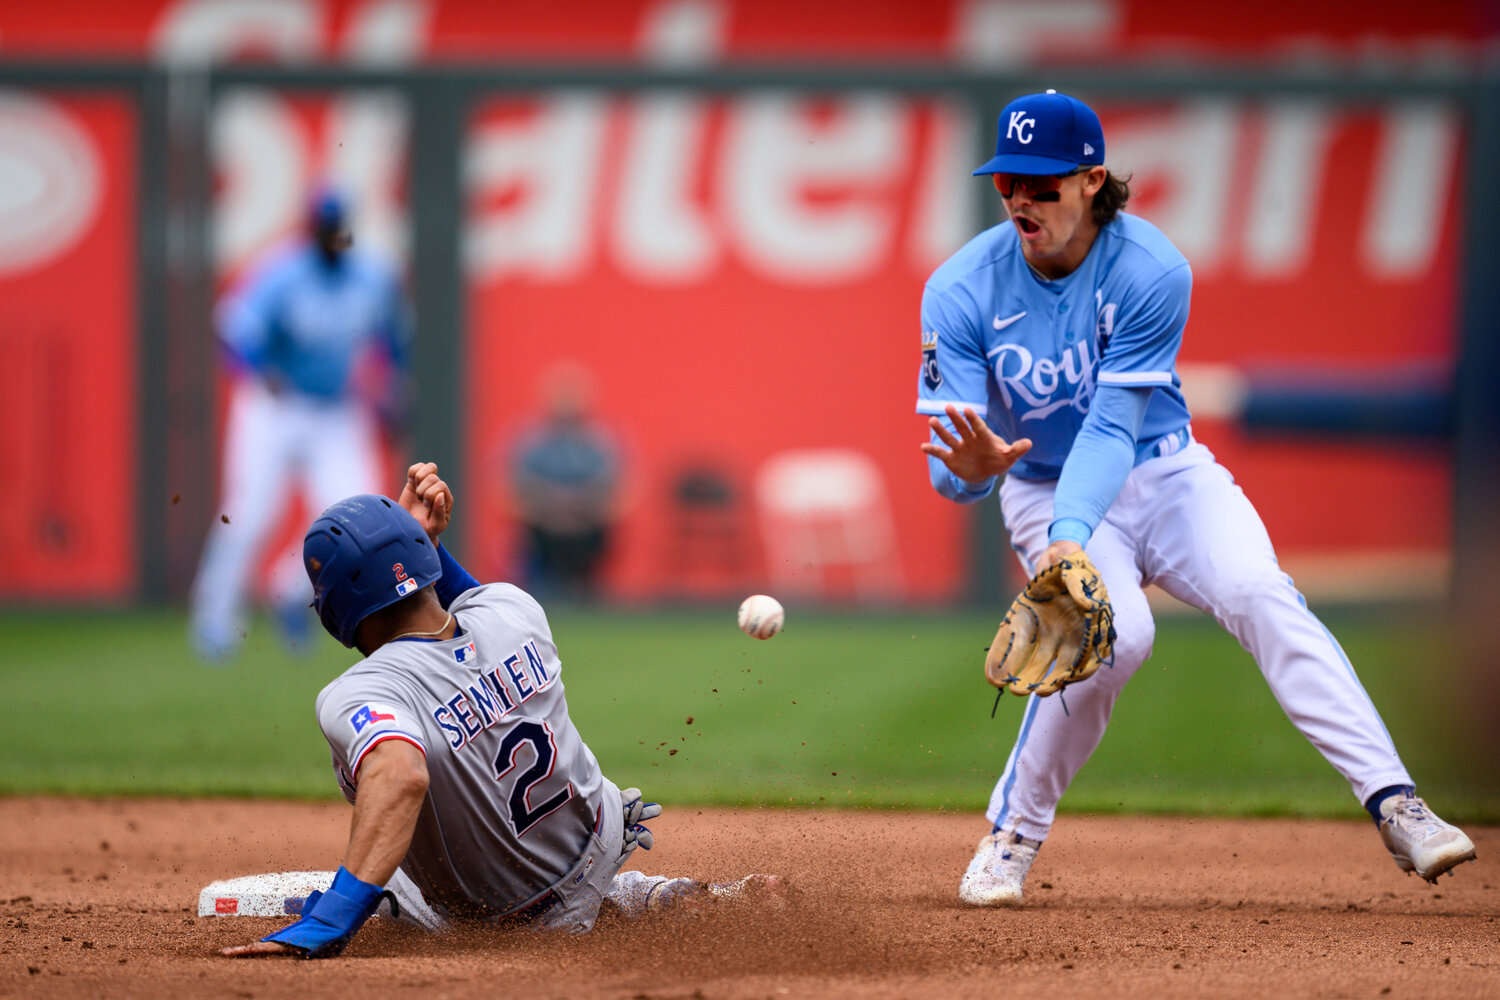 Texas Rangers' Marcus Semien (2) steals second safely ahead of the throw to Kansas City Royals shortstop Bobby Witt Jr. during the second inning of Wednesday's game in Kansas City, Mo. (AP Photo/Reed Hoffmann)